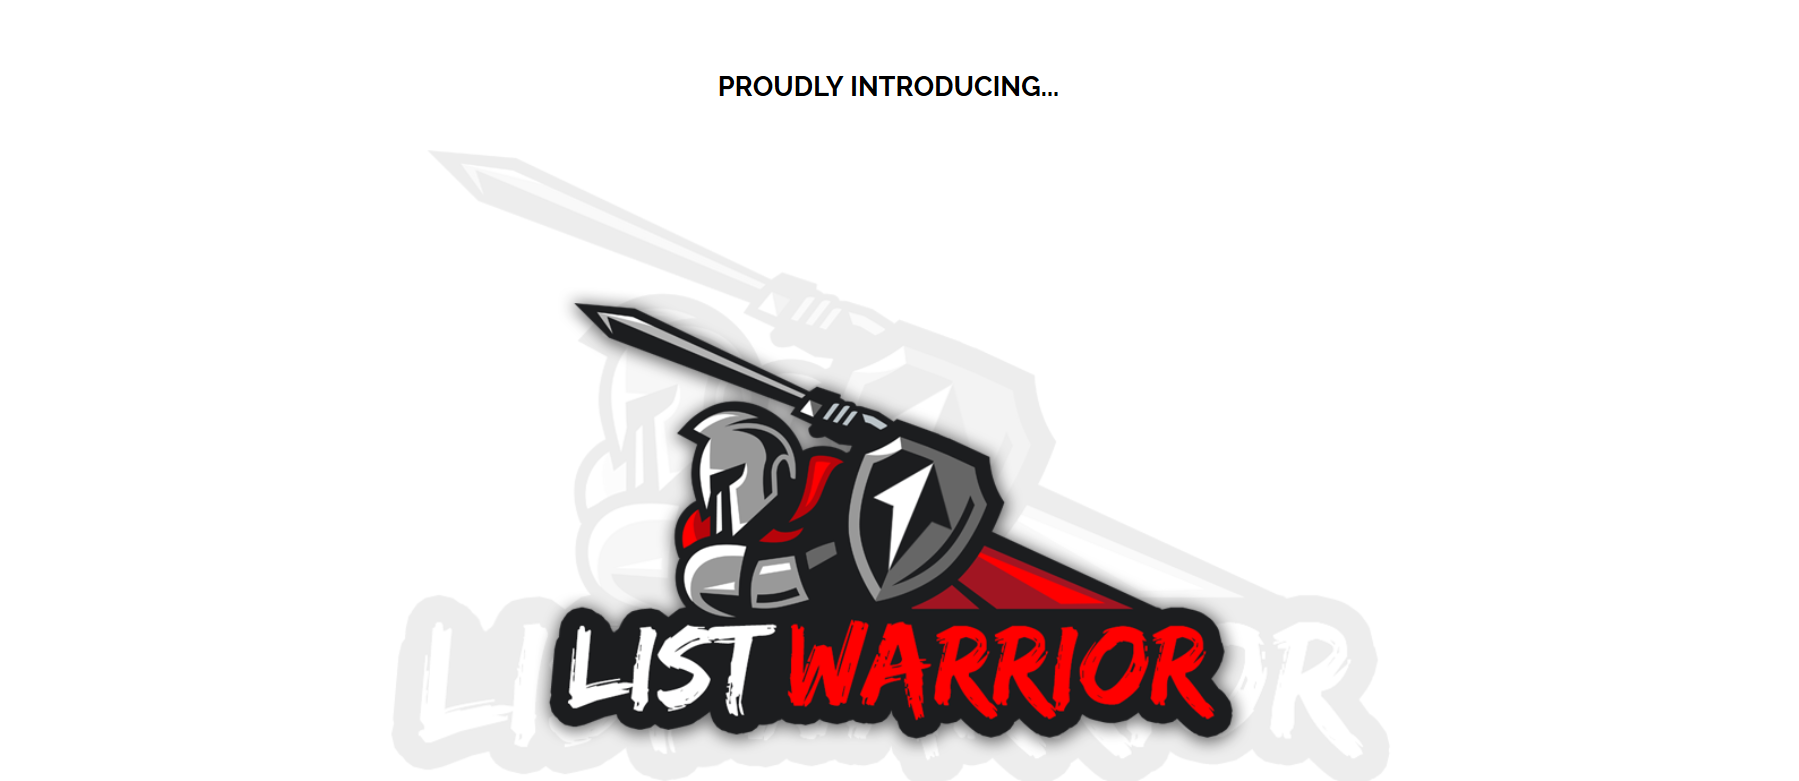 See the REAL PROOF for yourself... List Warrior Does It ALL For You... FORGET the "old school" way of building an e-mail list... LIST WARRIOR hands you POWERFUL SOFTWARE that gets OTHER PEOPLE to build your list for you. You DO NOT need to setup a website, host a "squeeze page" (e-mail opt-in page), setup a bunch of complicated technology, pay $100's per month for hosting, ClickFunnels, domain names, and then struggle to make it all actually freakin' work together for you... (UGH!!) ALL YOU NEED is an e-mail autoresponder (we even show you where to get setup with one for FREE) then you just get this "Warrior" to FIGHT FOR YOU to grow your list on near autopilot... My Honest List Warrior Review and Custom Bonuses Will Reveal The Products Good and Bad Features. So Watch It Now!